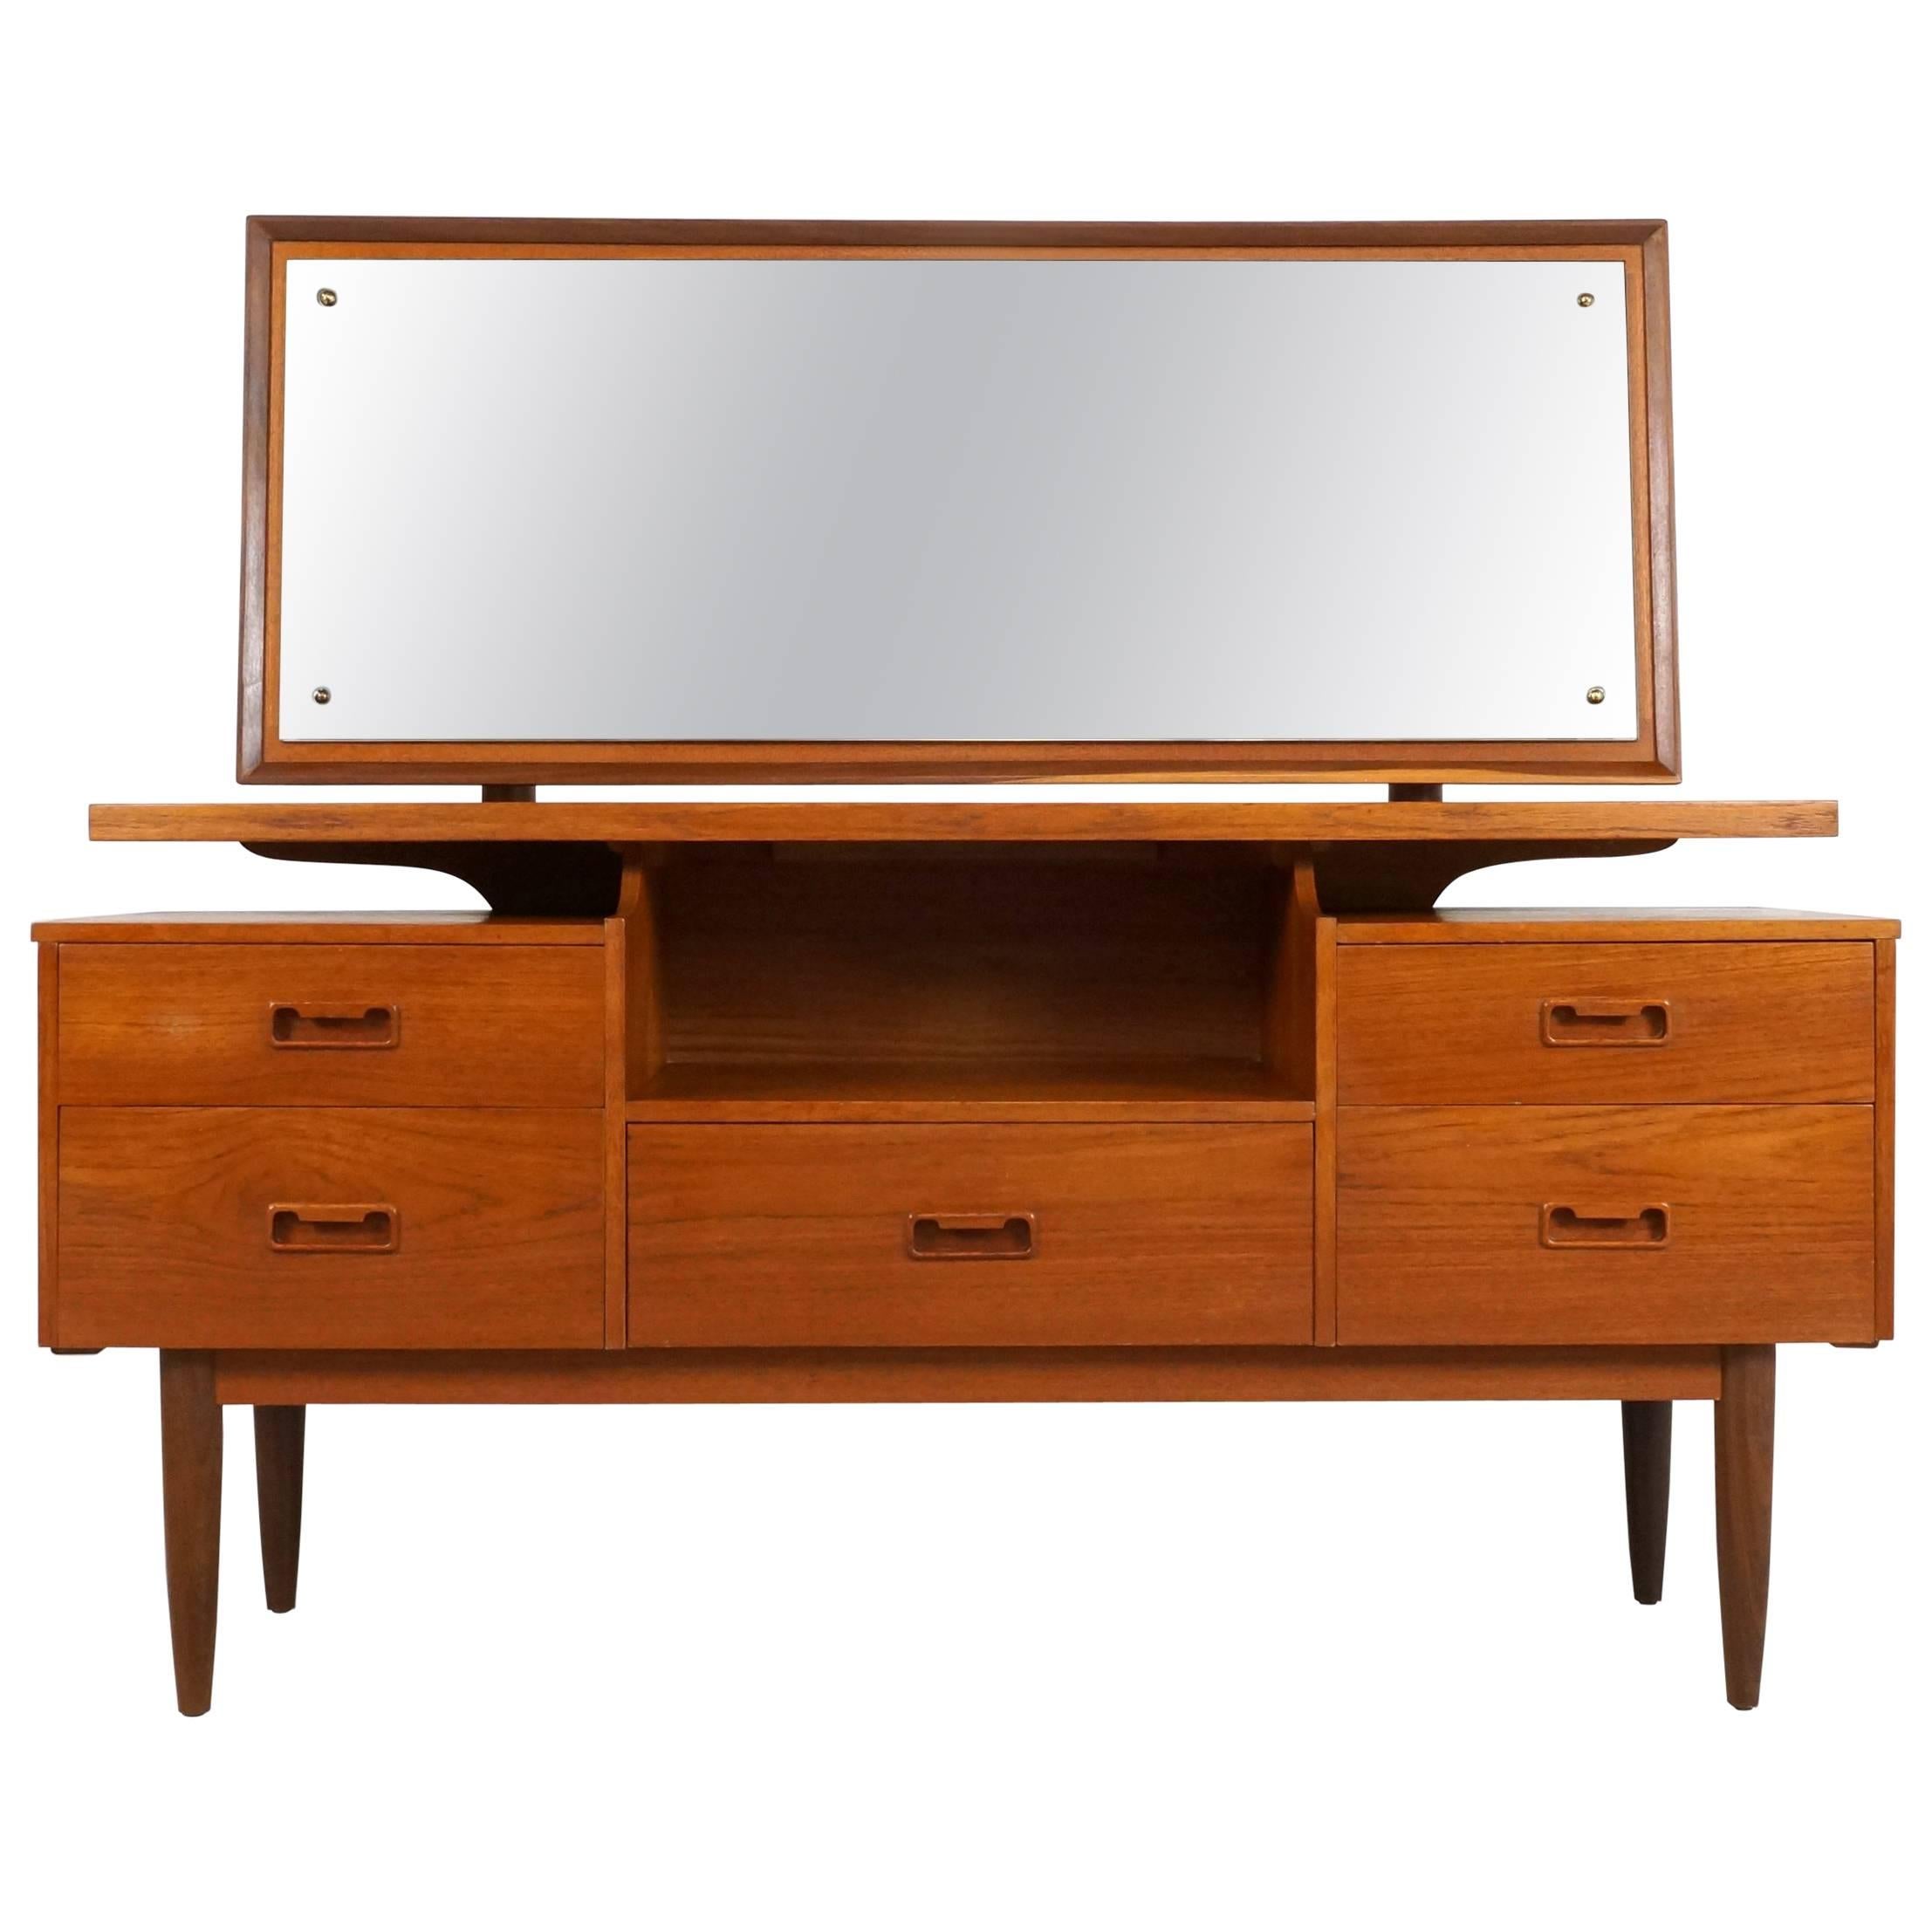 Danish Modern Teak Vanity or Dressing Table with Mirror, 1960s For Sale